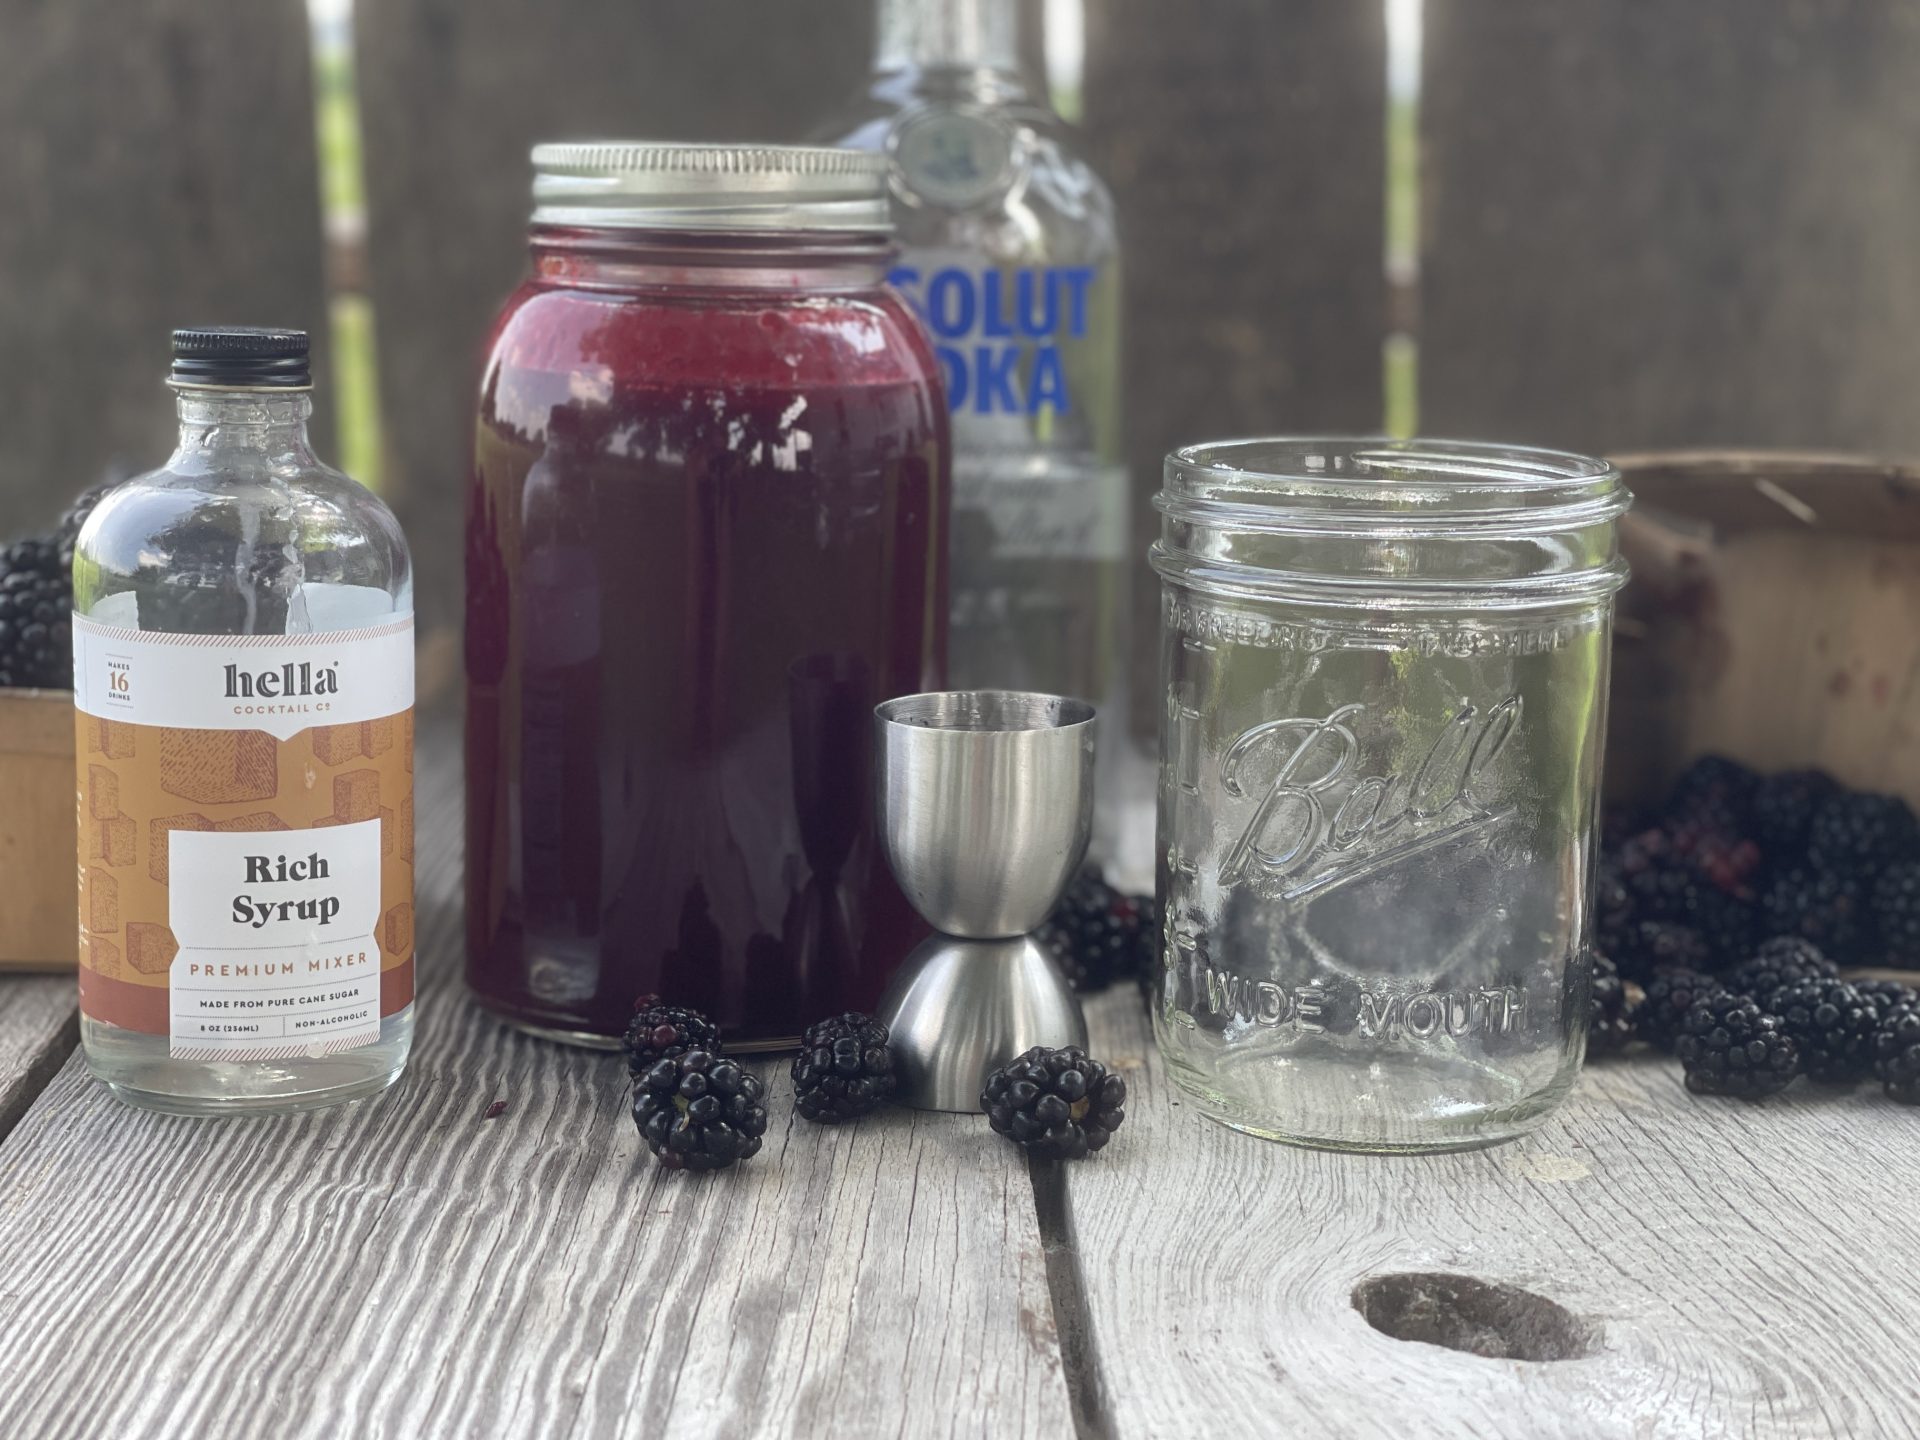 Black Widow Cocktail from Farmwife Feeds. Fresh blackberry juice and vodka make a wickedly good drink any season of the year. #cocktail #vodka #mixeddrink